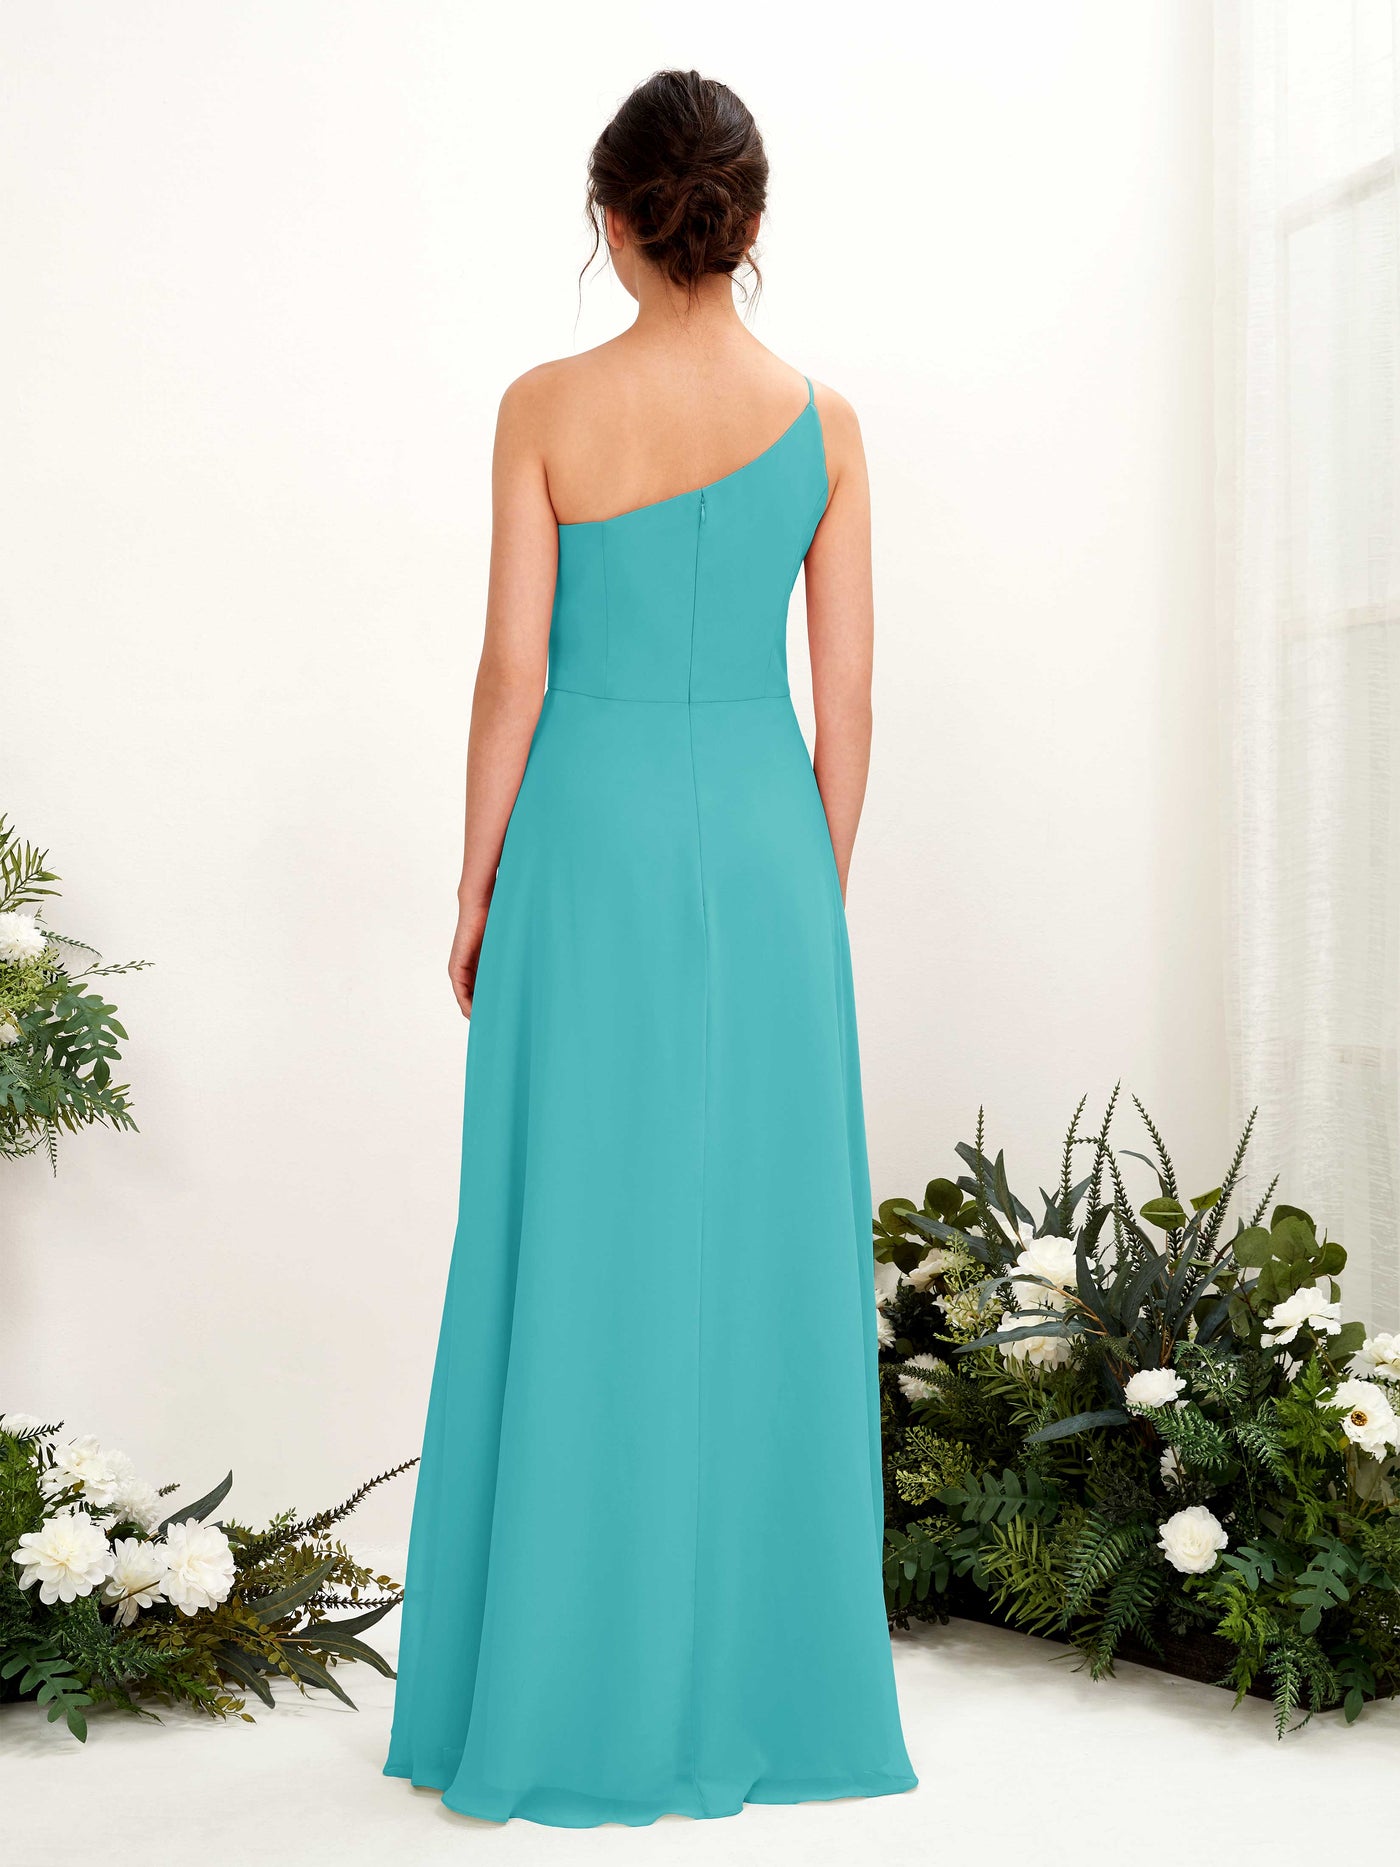 Turquoise Bridesmaid Dresses Bridesmaid Dress A-line Chiffon One Shoulder Full Length Sleeveless Wedding Party Dress (81225723)#color_turquoise